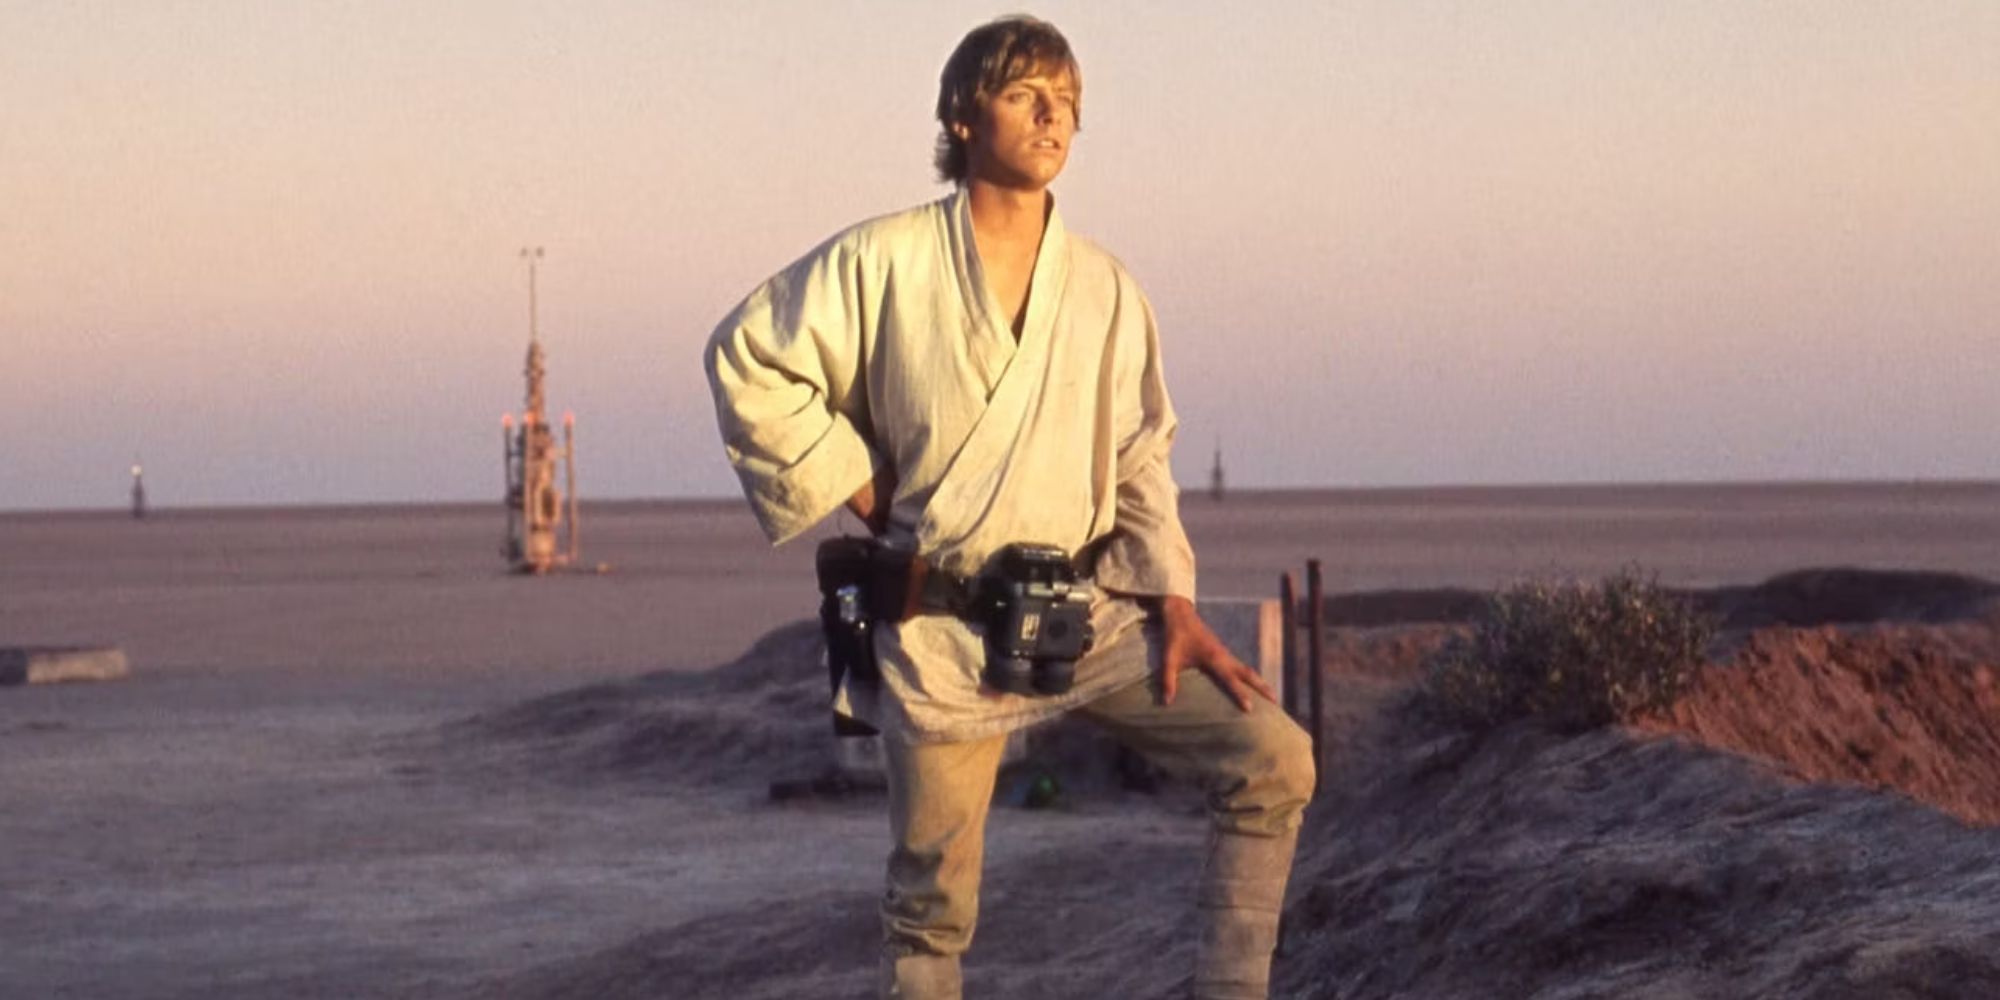 Mark Hamill as Luke Skywalker looking into the distance in Star Wars: Episode IV - A New Hope